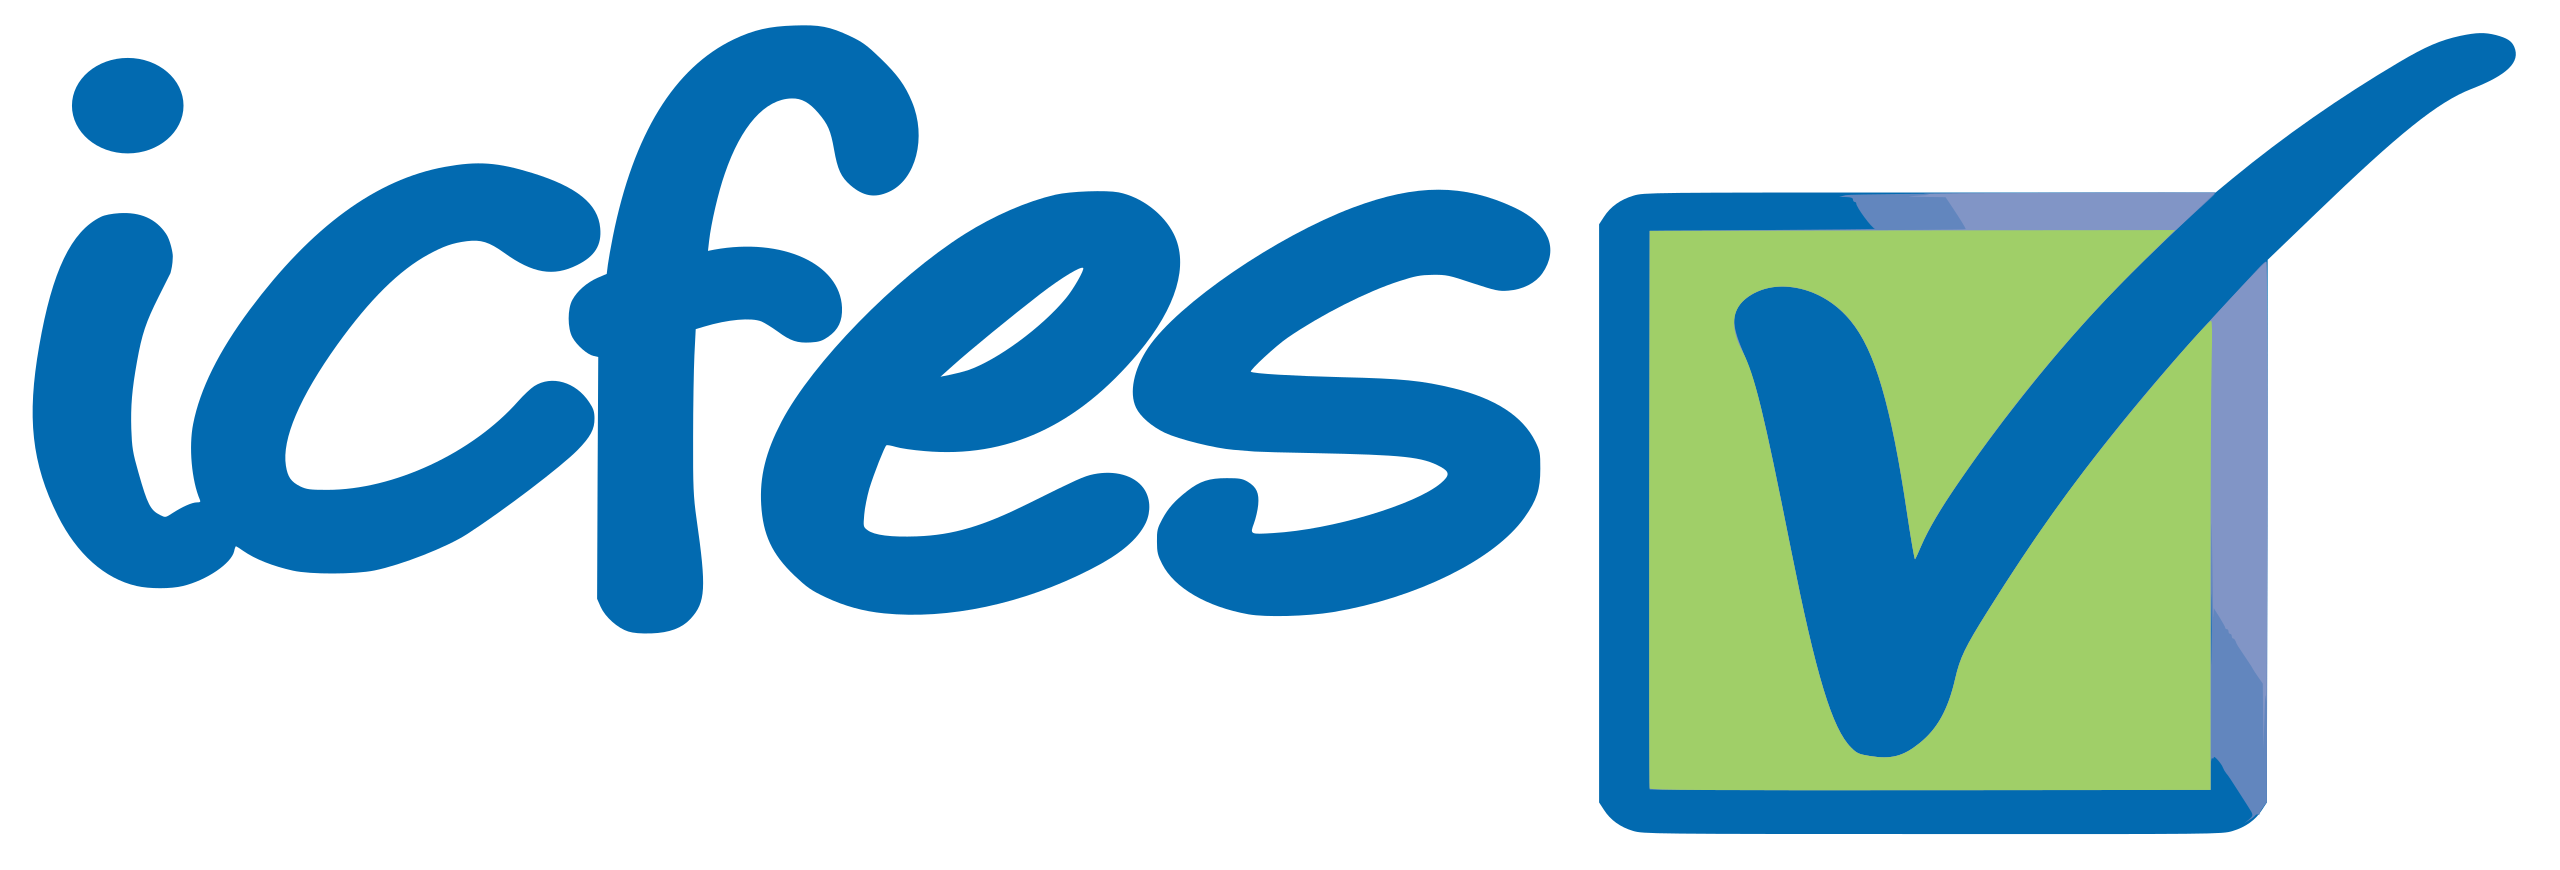 2560px-Icfes_Colombia_logo.svg